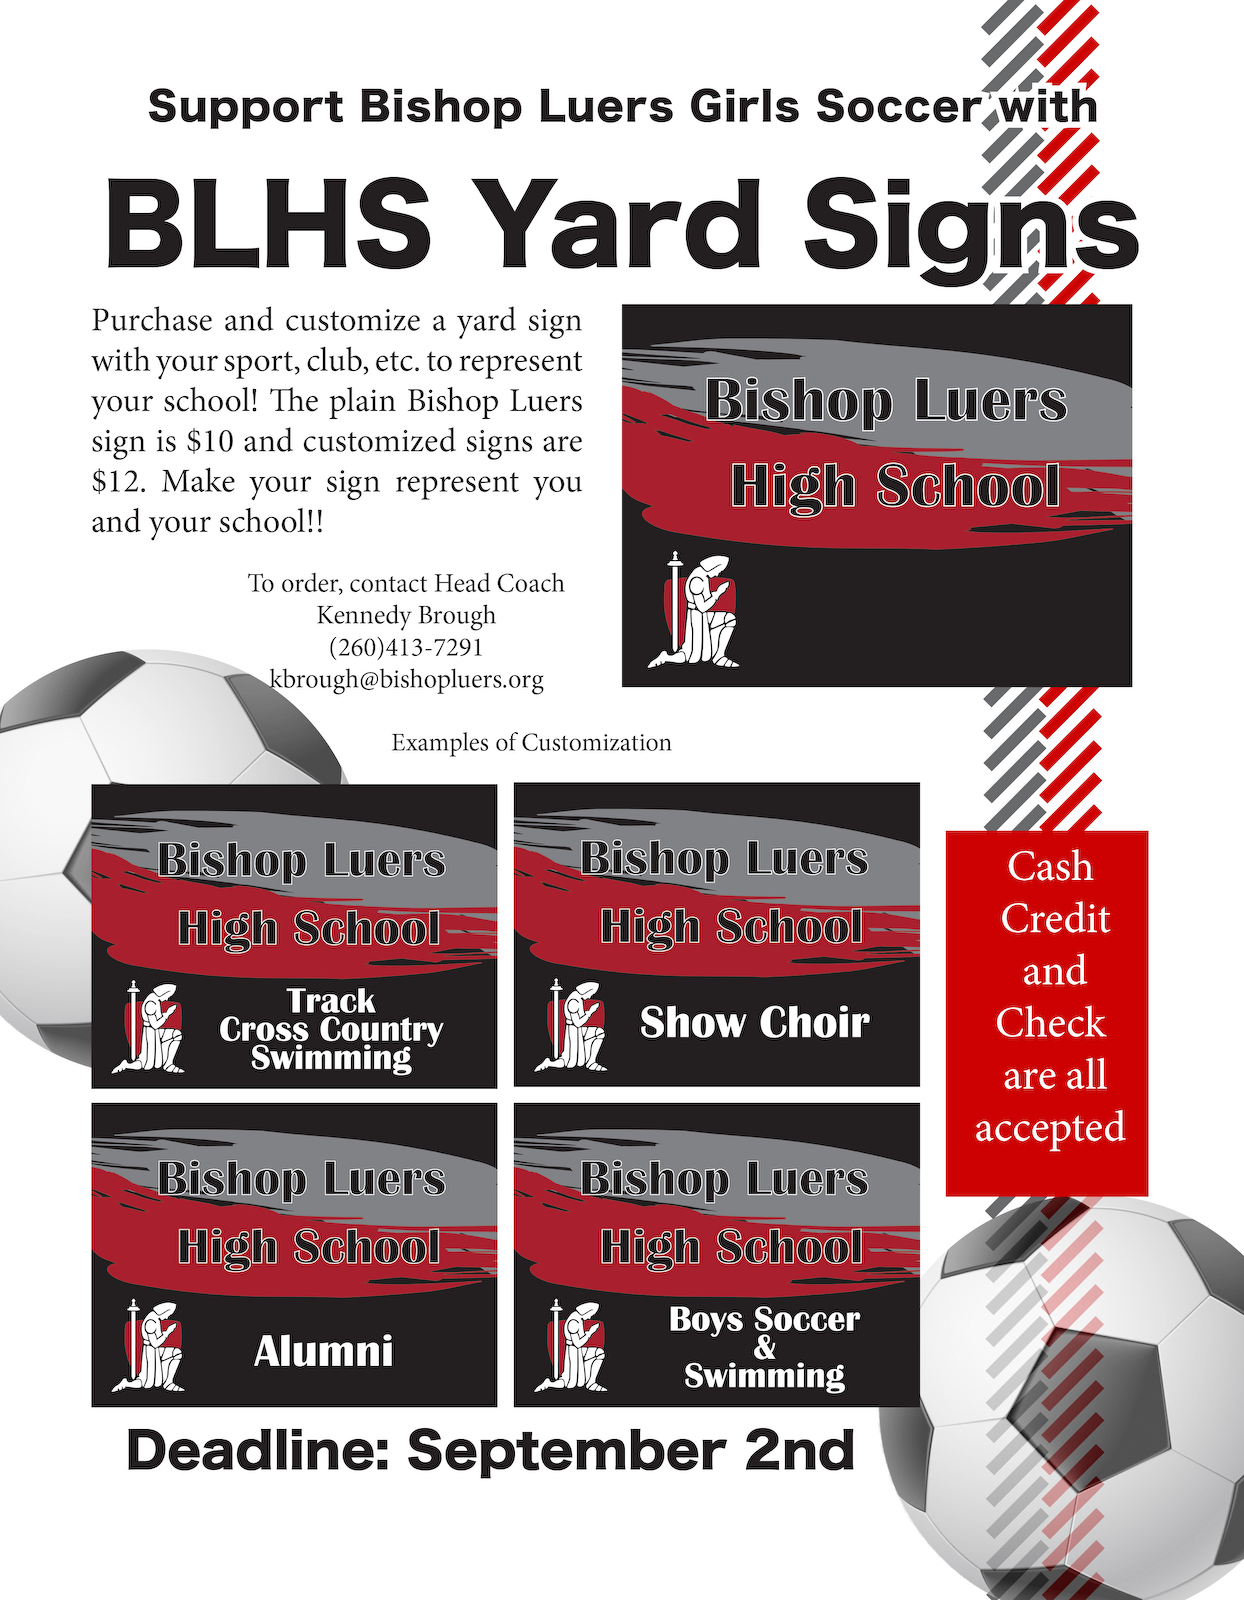 GSoccer Yard Sign Flyer.png